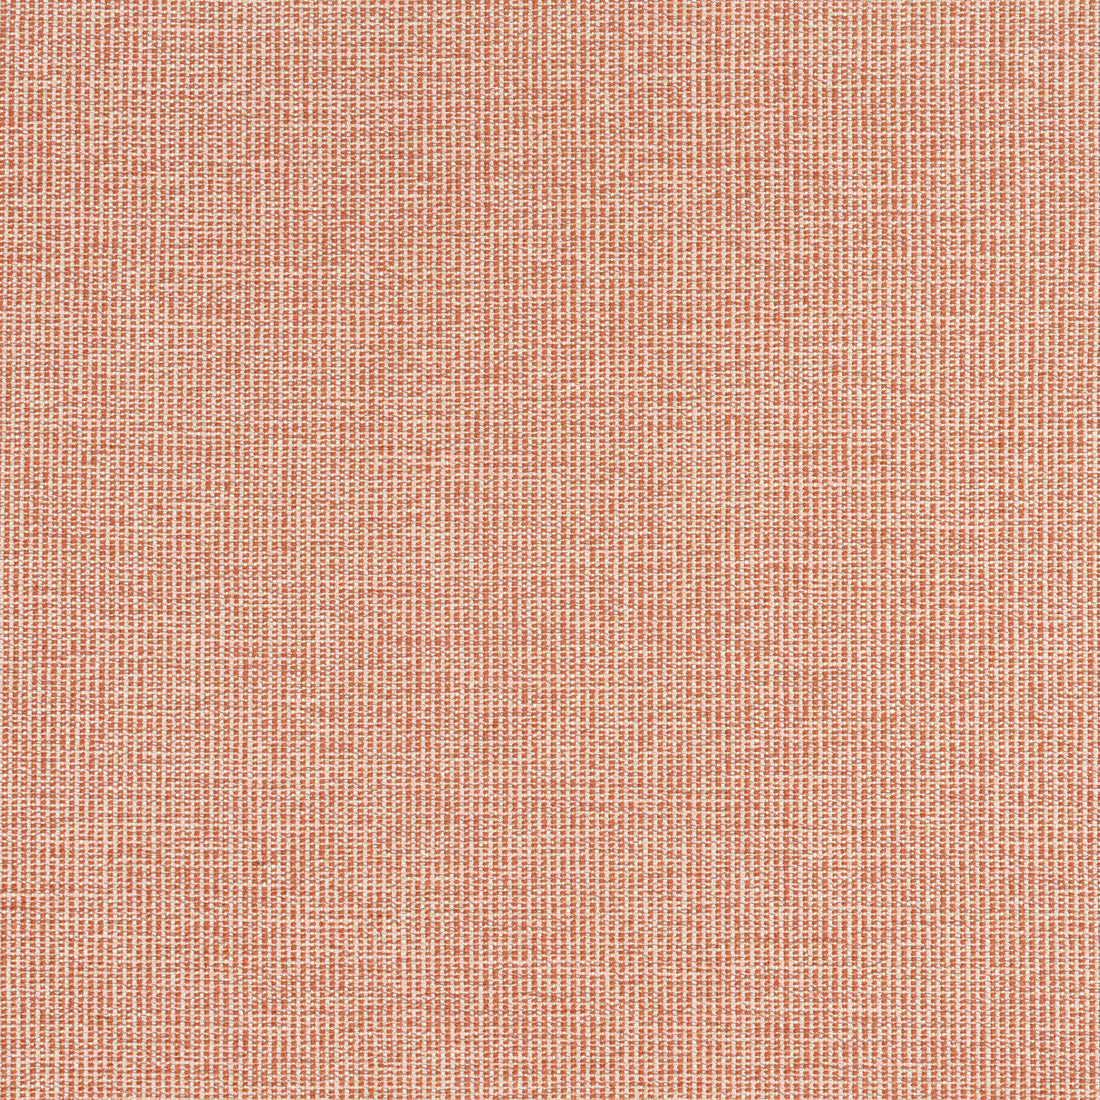 Sacchi fabric in terracotta color - pattern number W8761 - by Thibaut in the Haven Textures collection